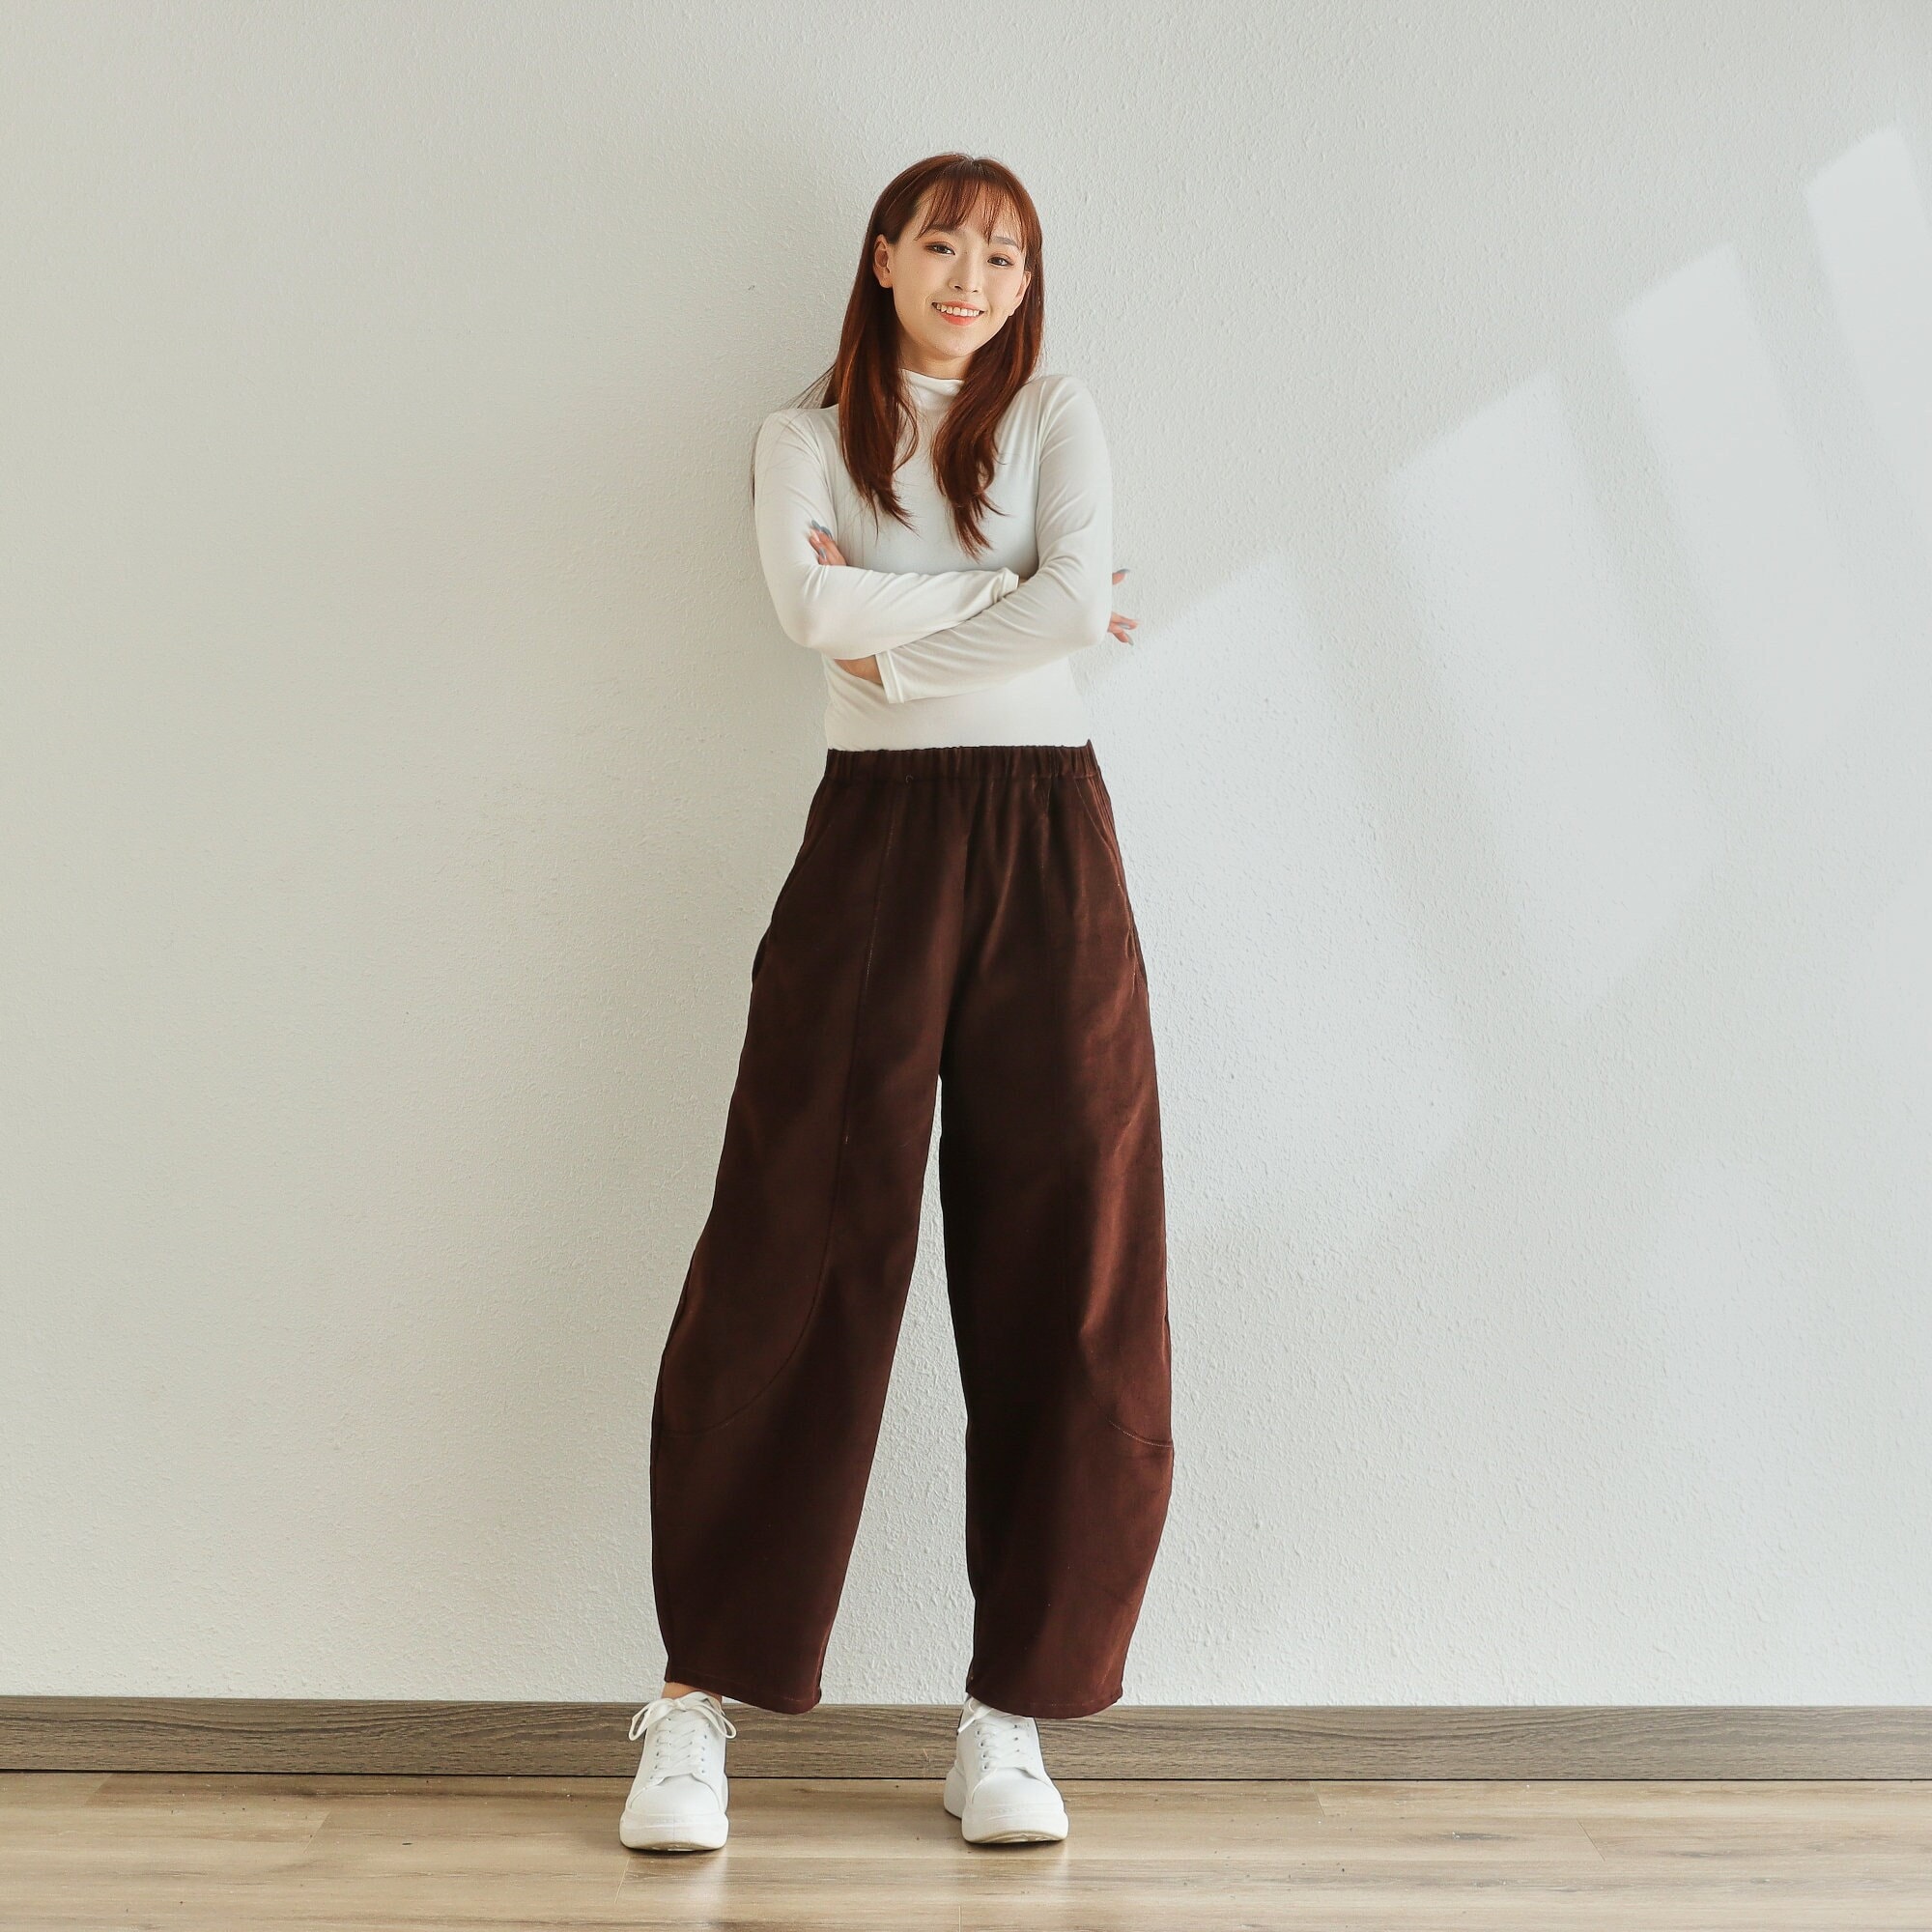 Corduroy Winter White Pants 80s, Pleated Trousers, Women Baggy Dress Pants  -  Canada